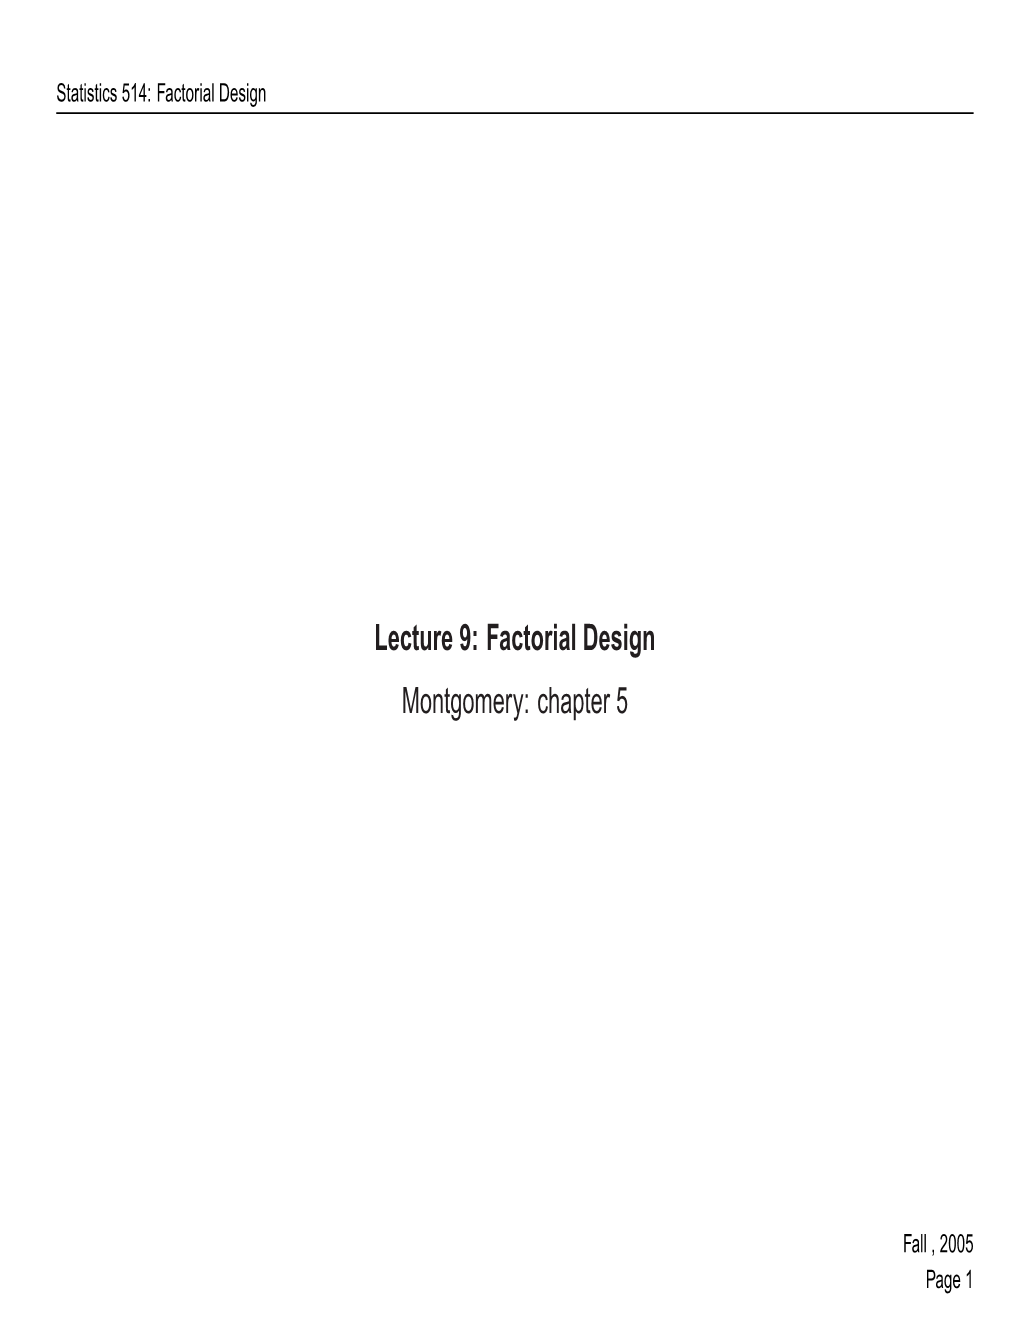 Lecture 9: Factorial Design Montgomery: Chapter 5